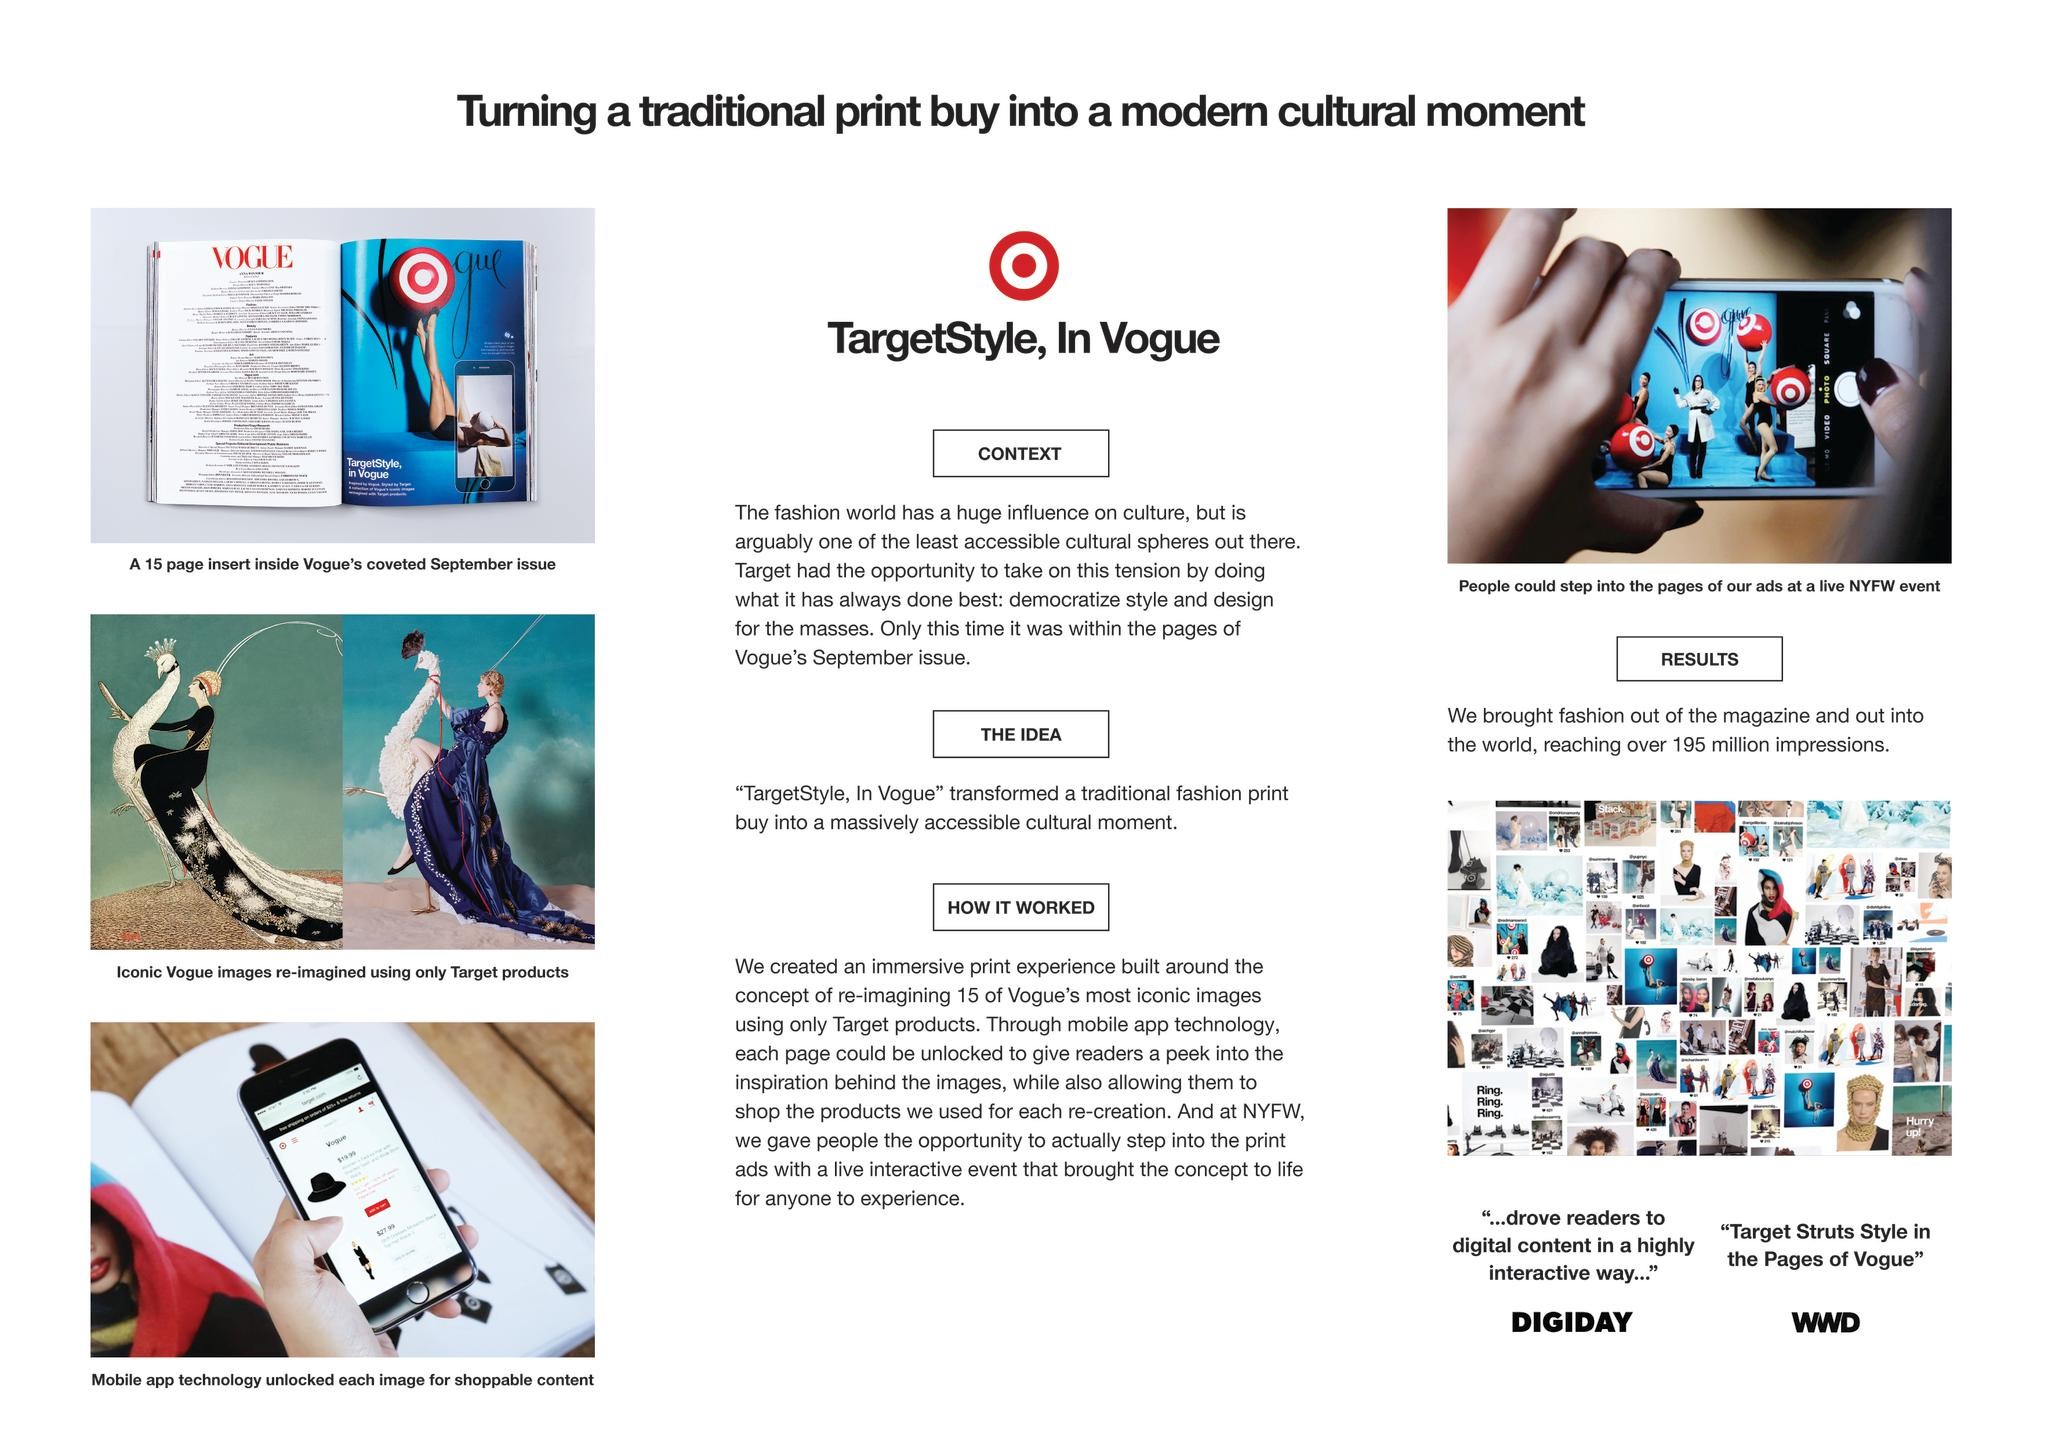 TargetStyle, In Vogue